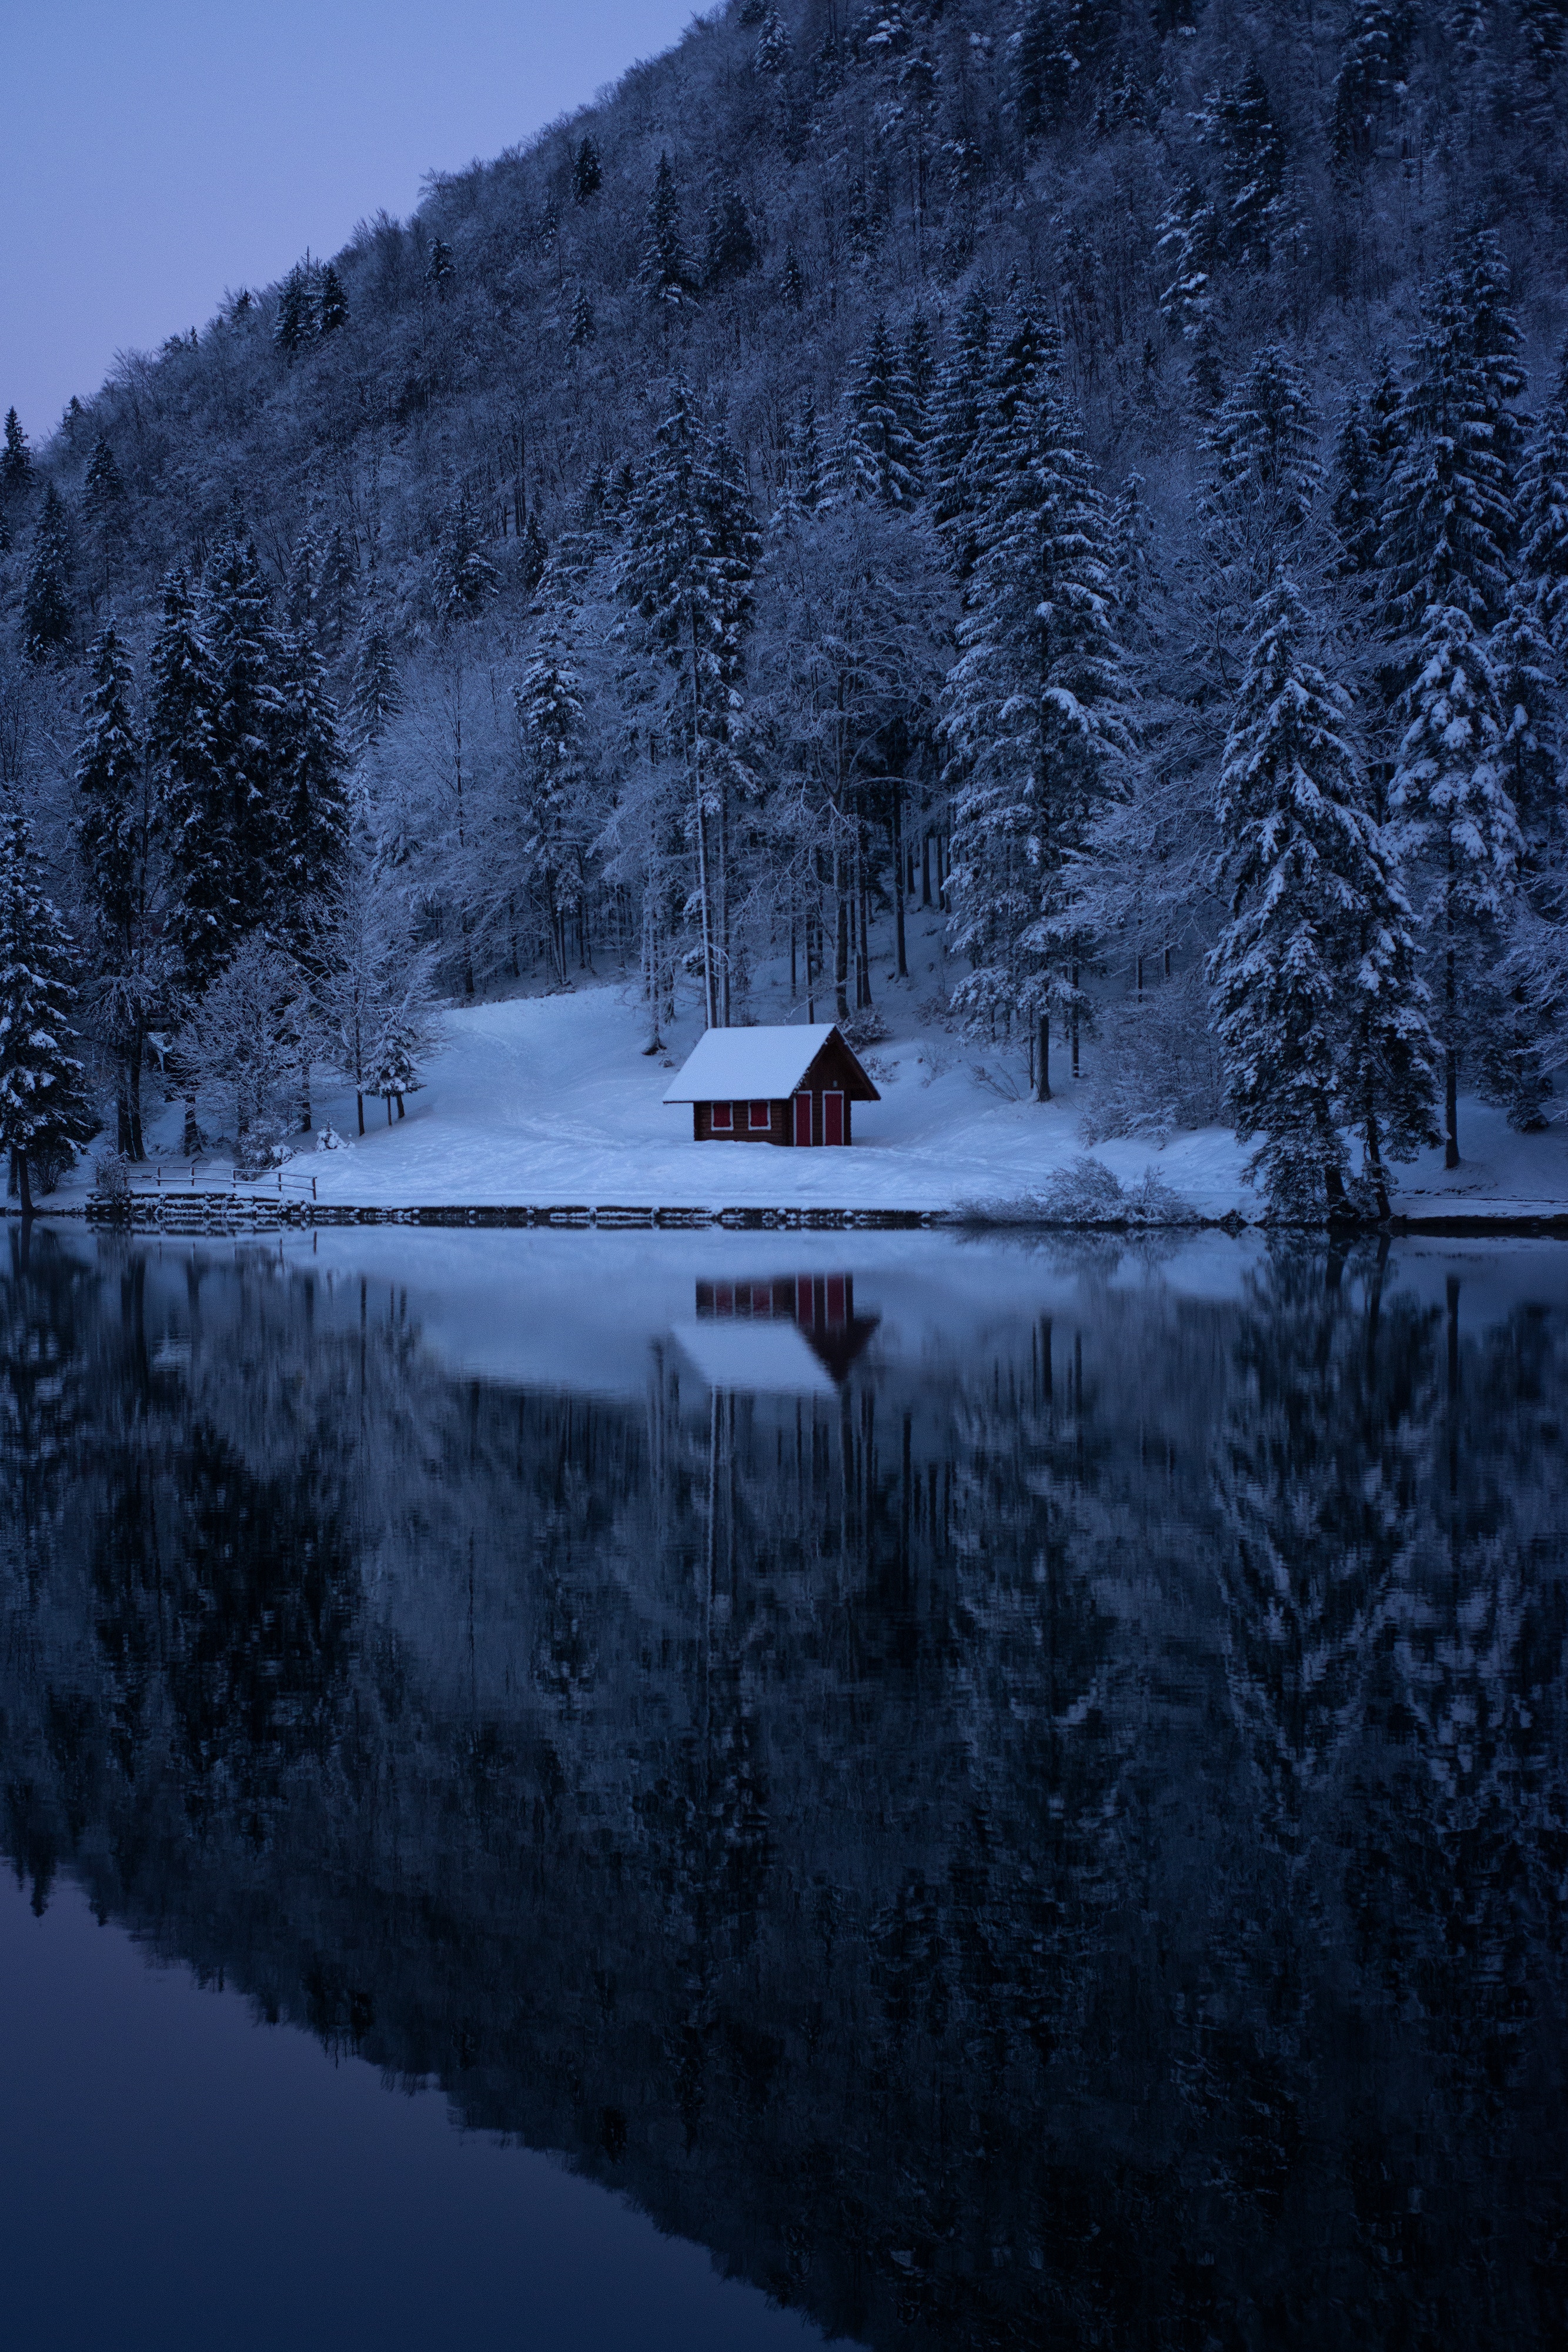 snow, trees, forest, nature, winter, lake